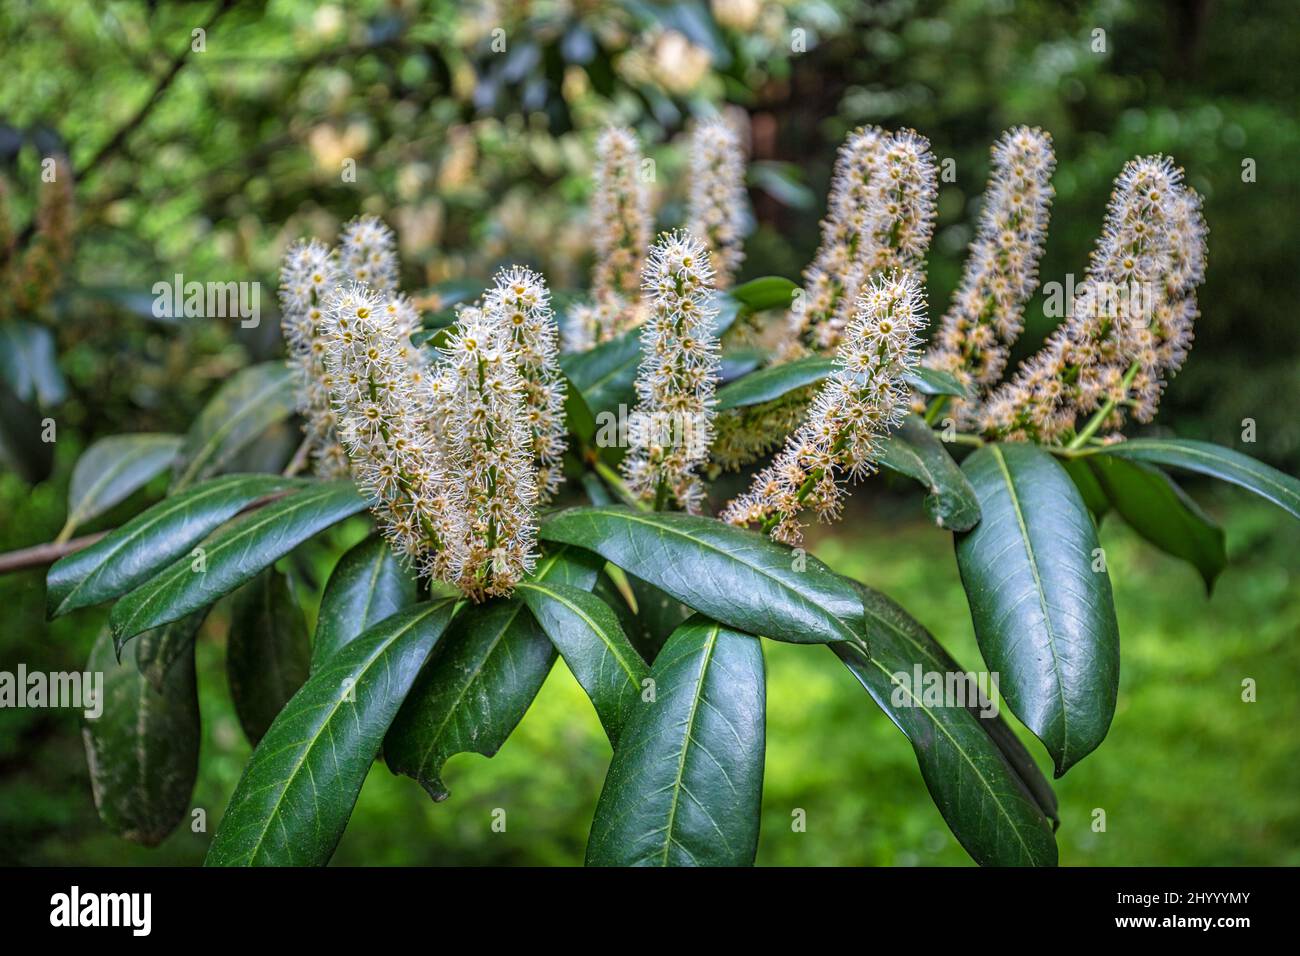 Foliage and flowers of Prunus laurocerasus, also known as cherry laurel, in close-up view on a blurred background. Stock Photo